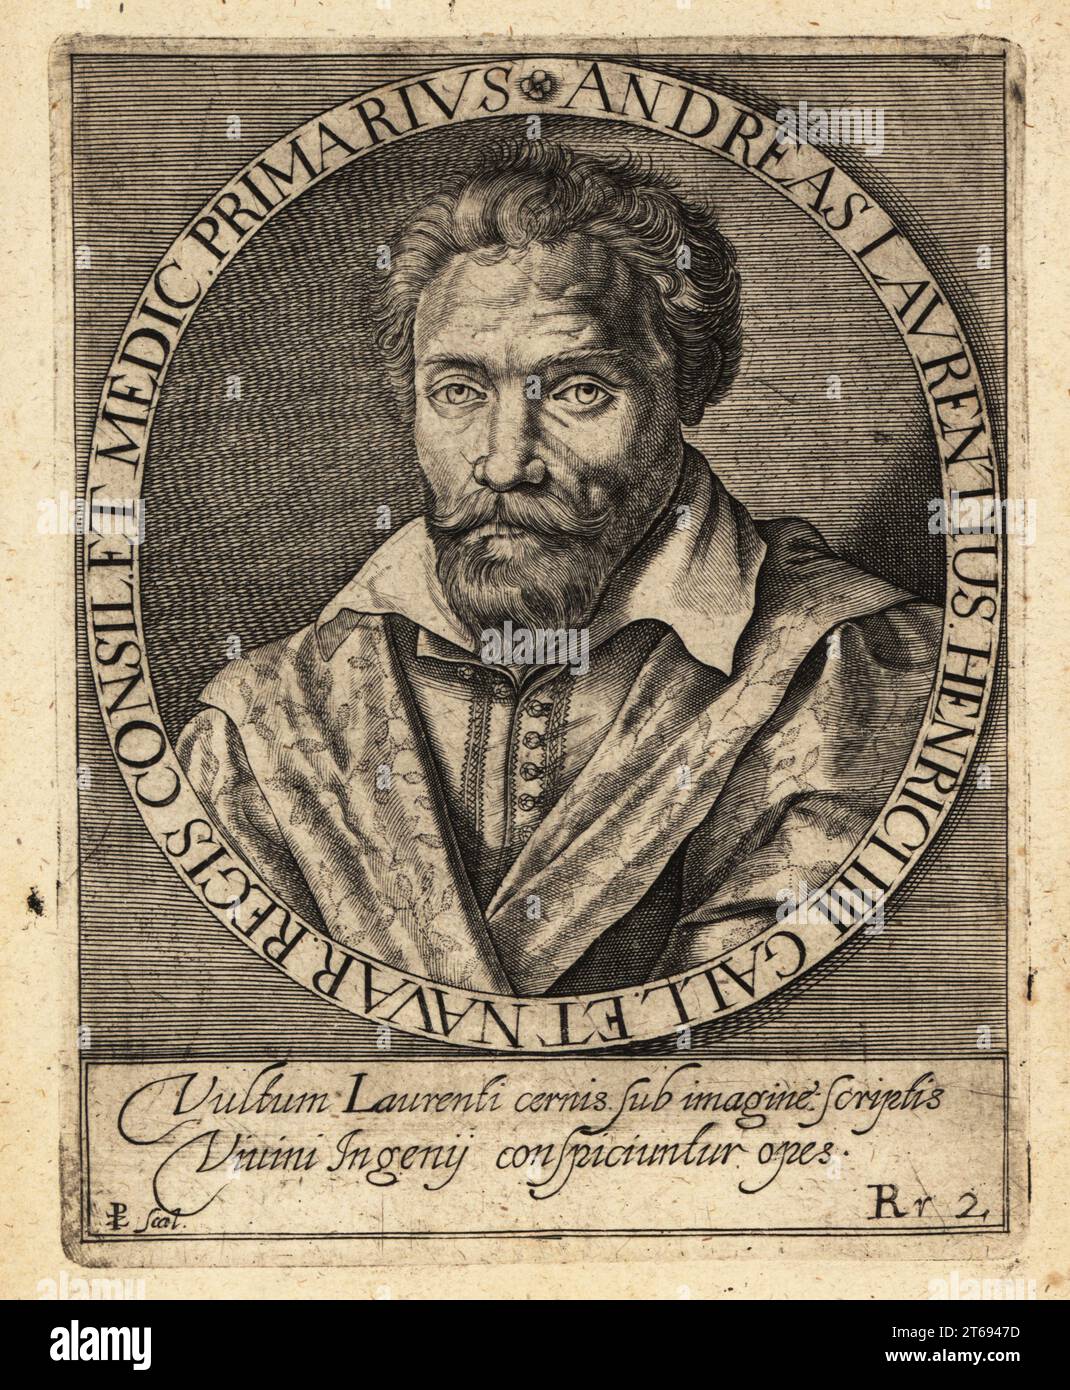 Andre du Laurens, French physician to King Henry IV, 1558-1609. Andreas Lavrentius, Henrici IIII Gall et Navar Regis Consilet Medicus Primarius. Copperplate engraving by Johann Theodore de Bry from Jean-Jacques Boissards Bibliotheca Chalcographica, Johann Ammonius, Frankfurt, 1650. Stock Photo